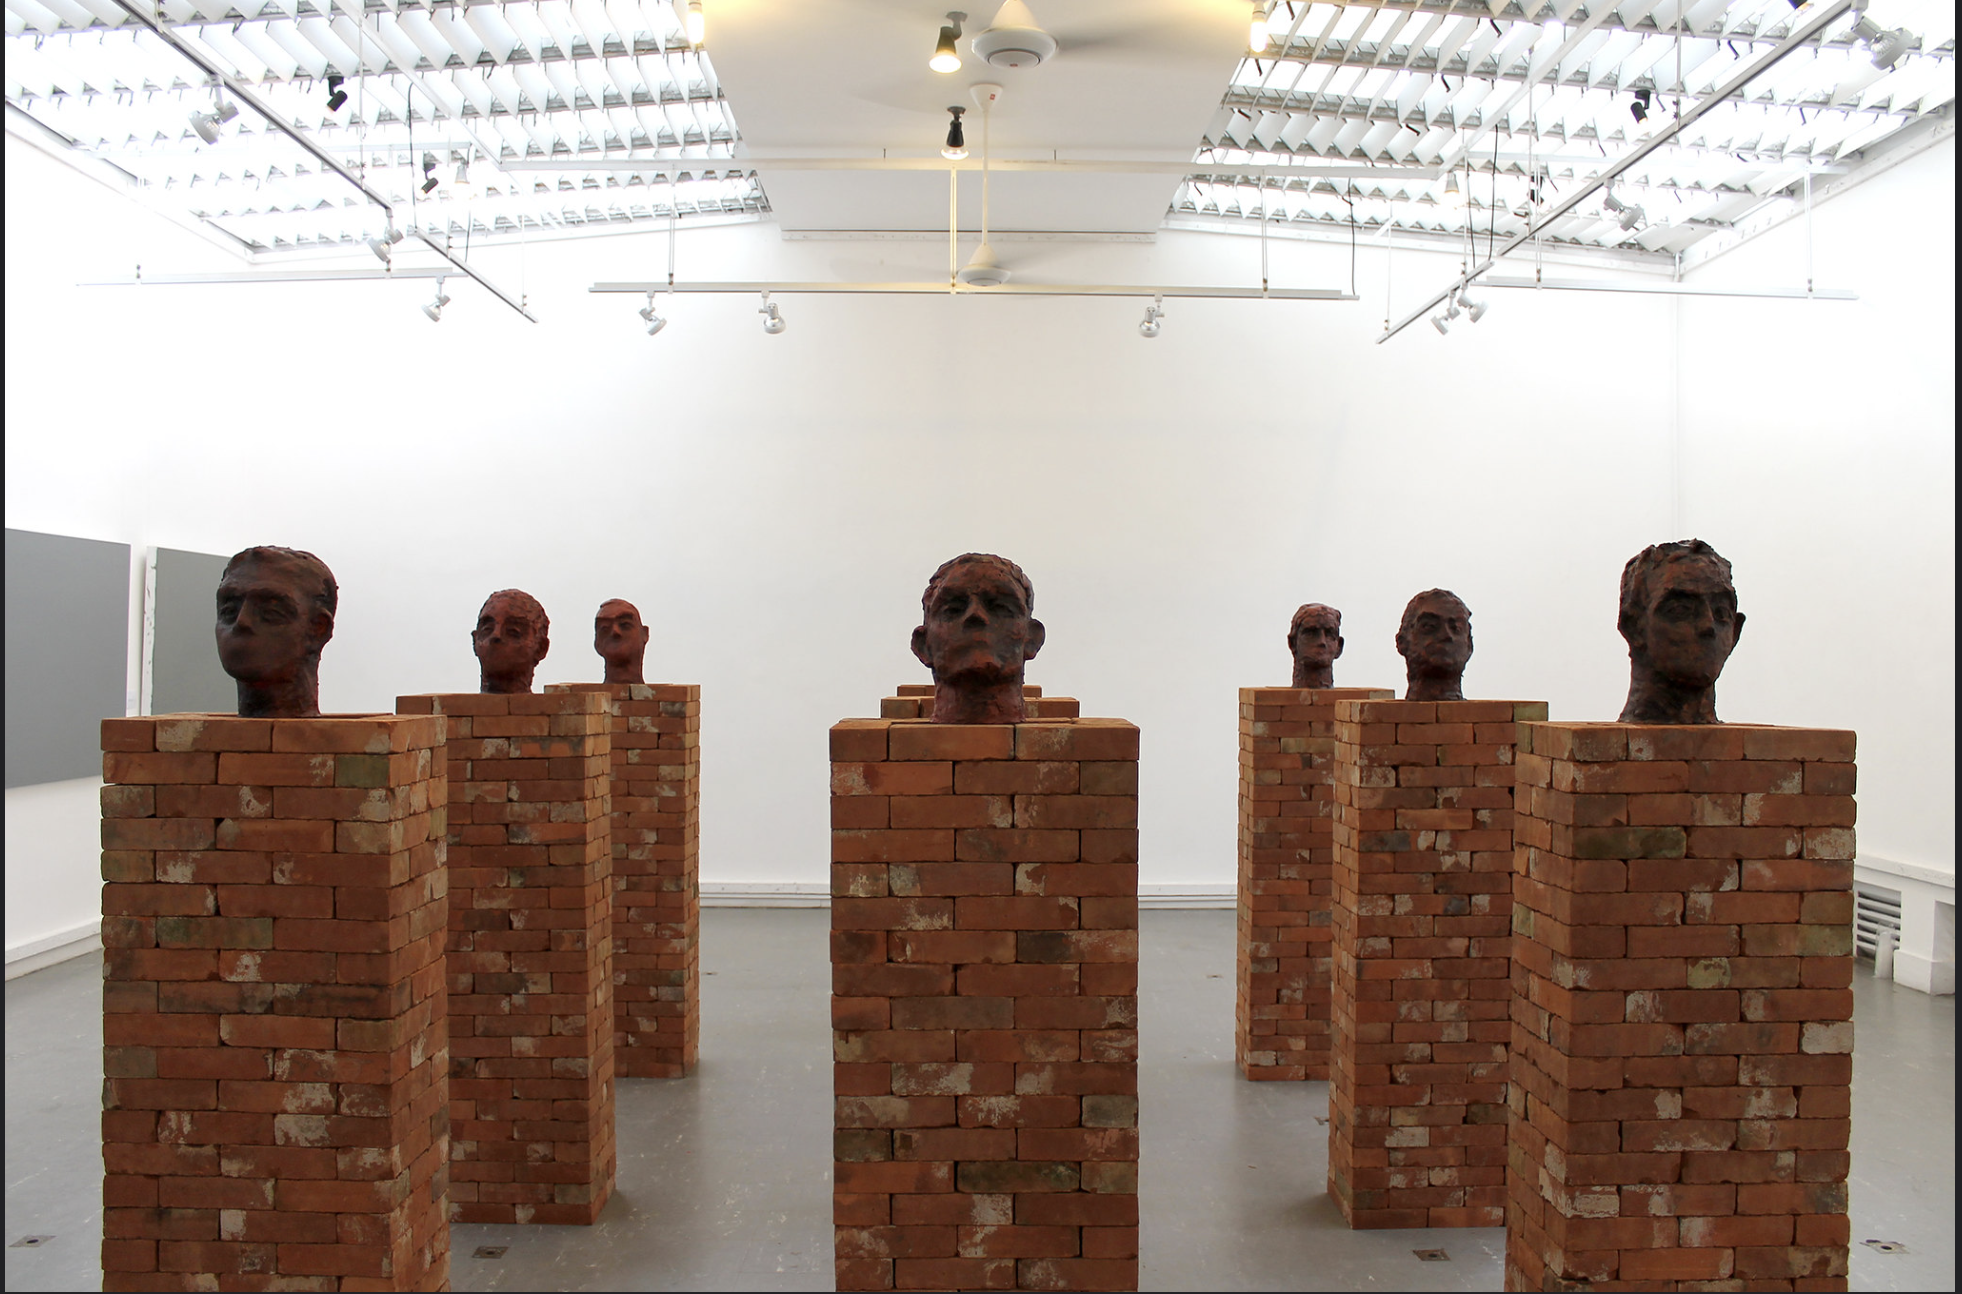 a group of brick pillars with heads on them